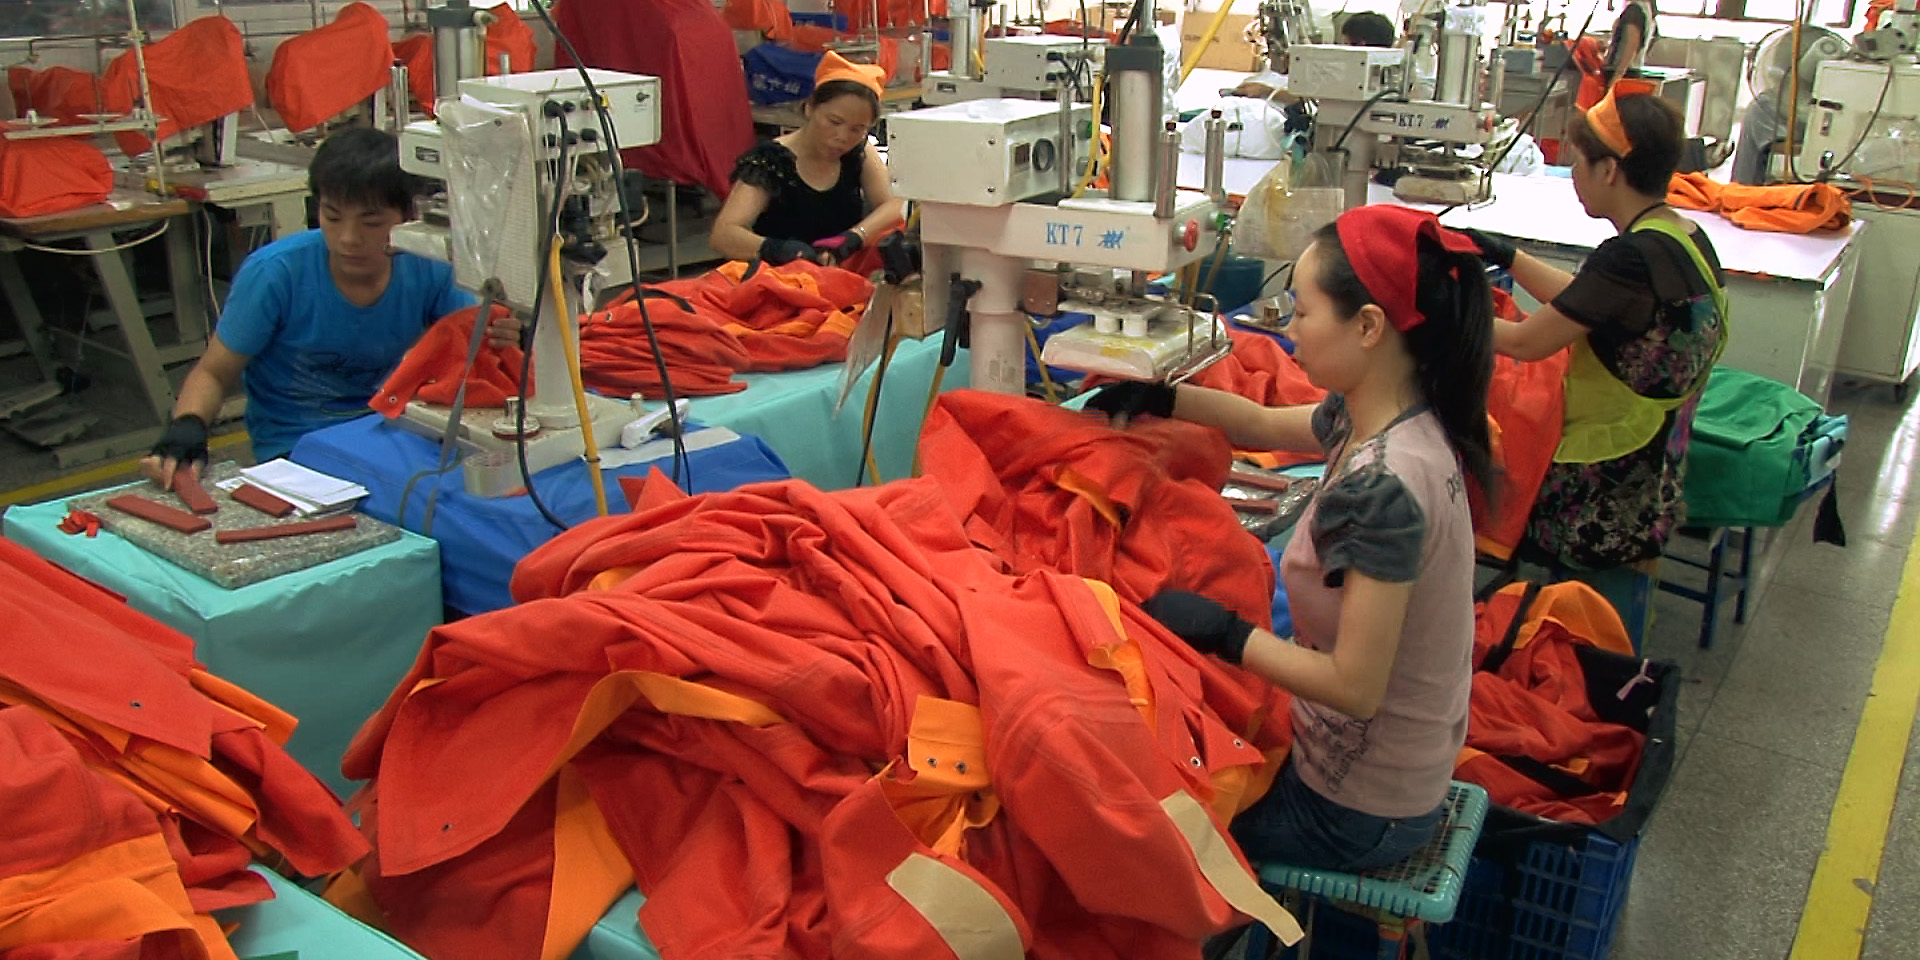 VAUDE | "Bekleidungs-Produktion in Asien" | Commercial Documentary